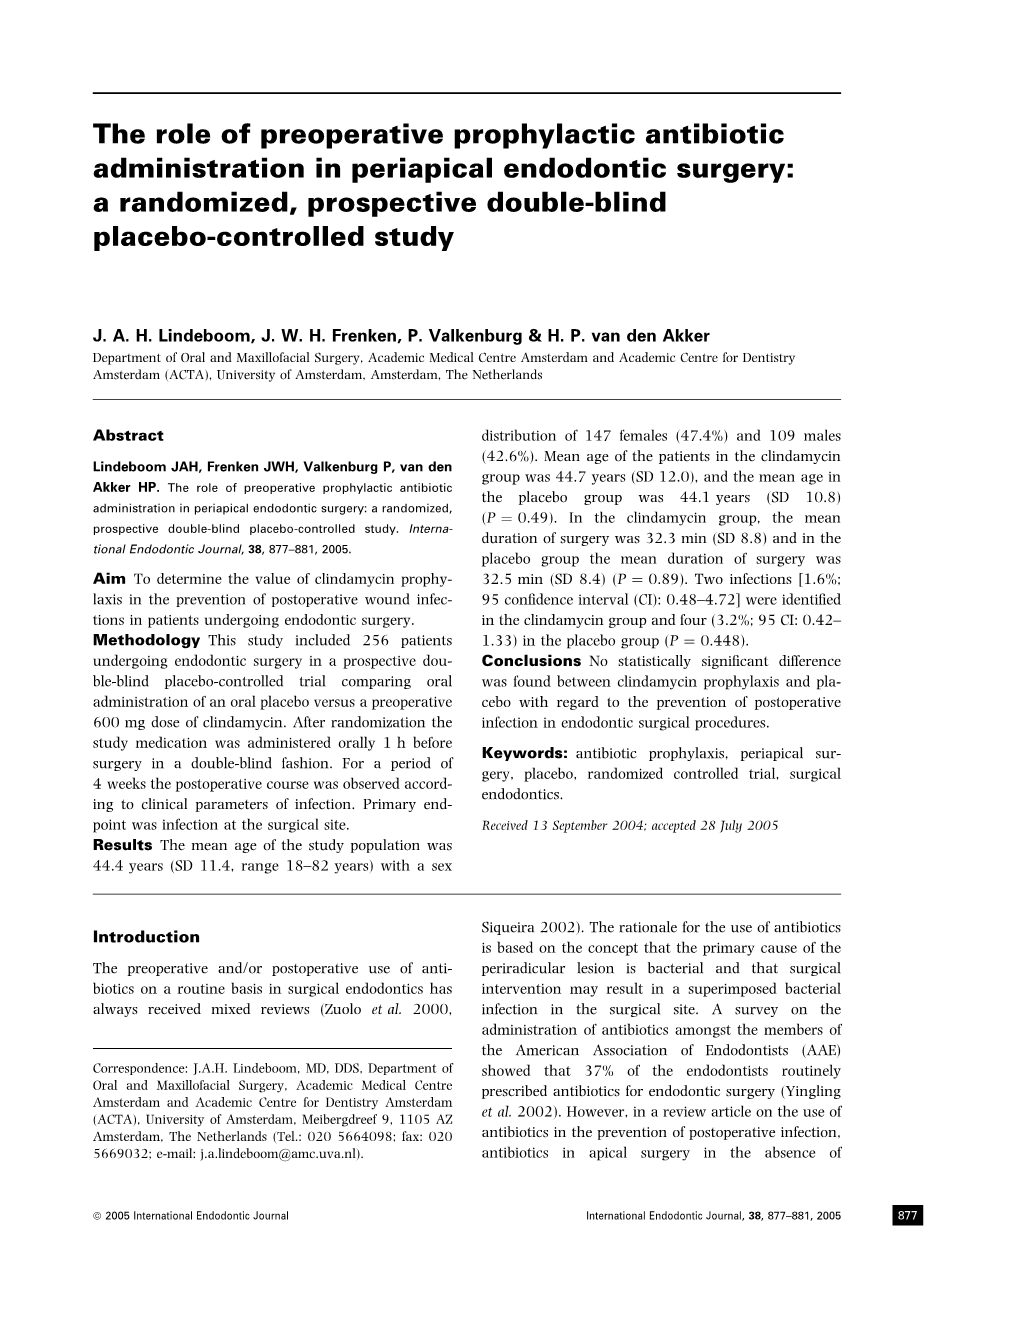 The Role of Preoperative Prophylactic Antibiotic Administration in Periapical Endodontic Surgery: a Randomized, Prospective Double-Blind Placebo-Controlled Study